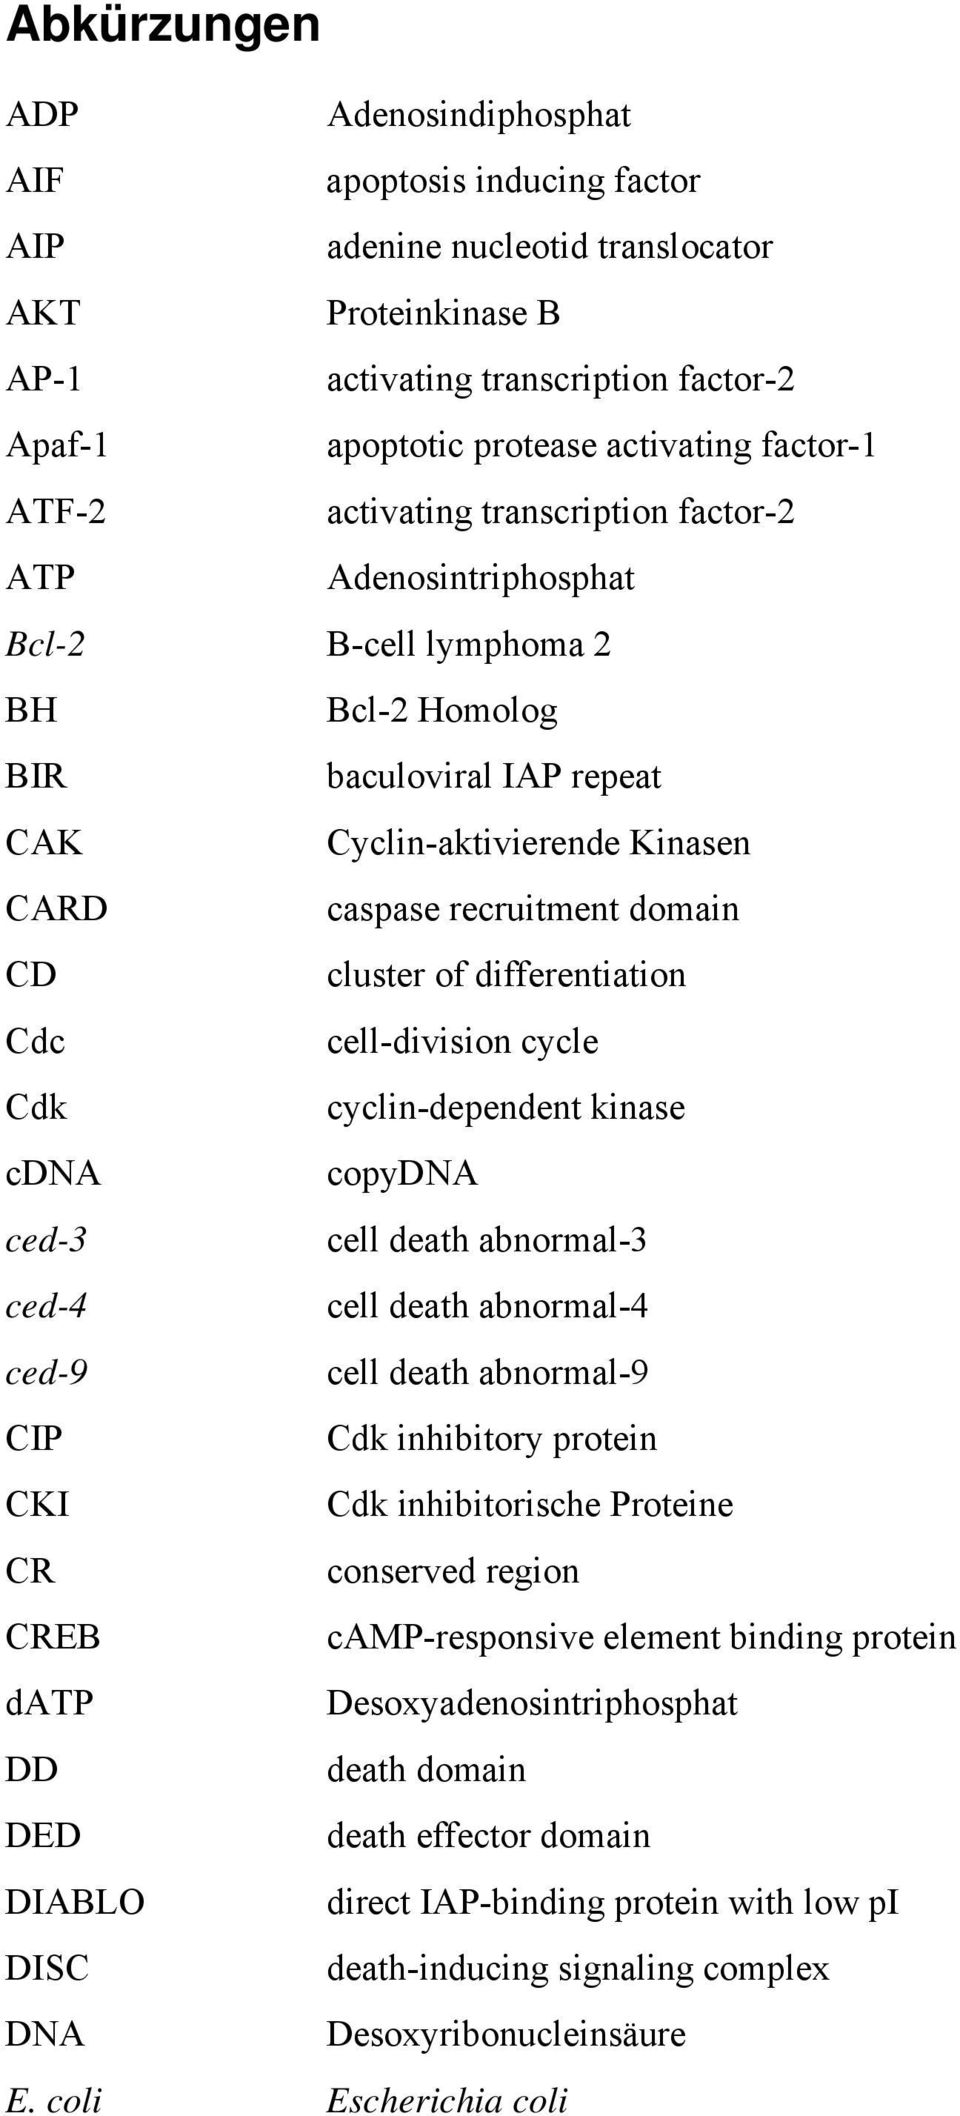 domain CD cluster of differentiation Cdc cell-division cycle Cdk cyclin-dependent kinase cdna copydna ced-3 cell death abnormal-3 ced-4 cell death abnormal-4 ced-9 cell death abnormal-9 CIP Cdk